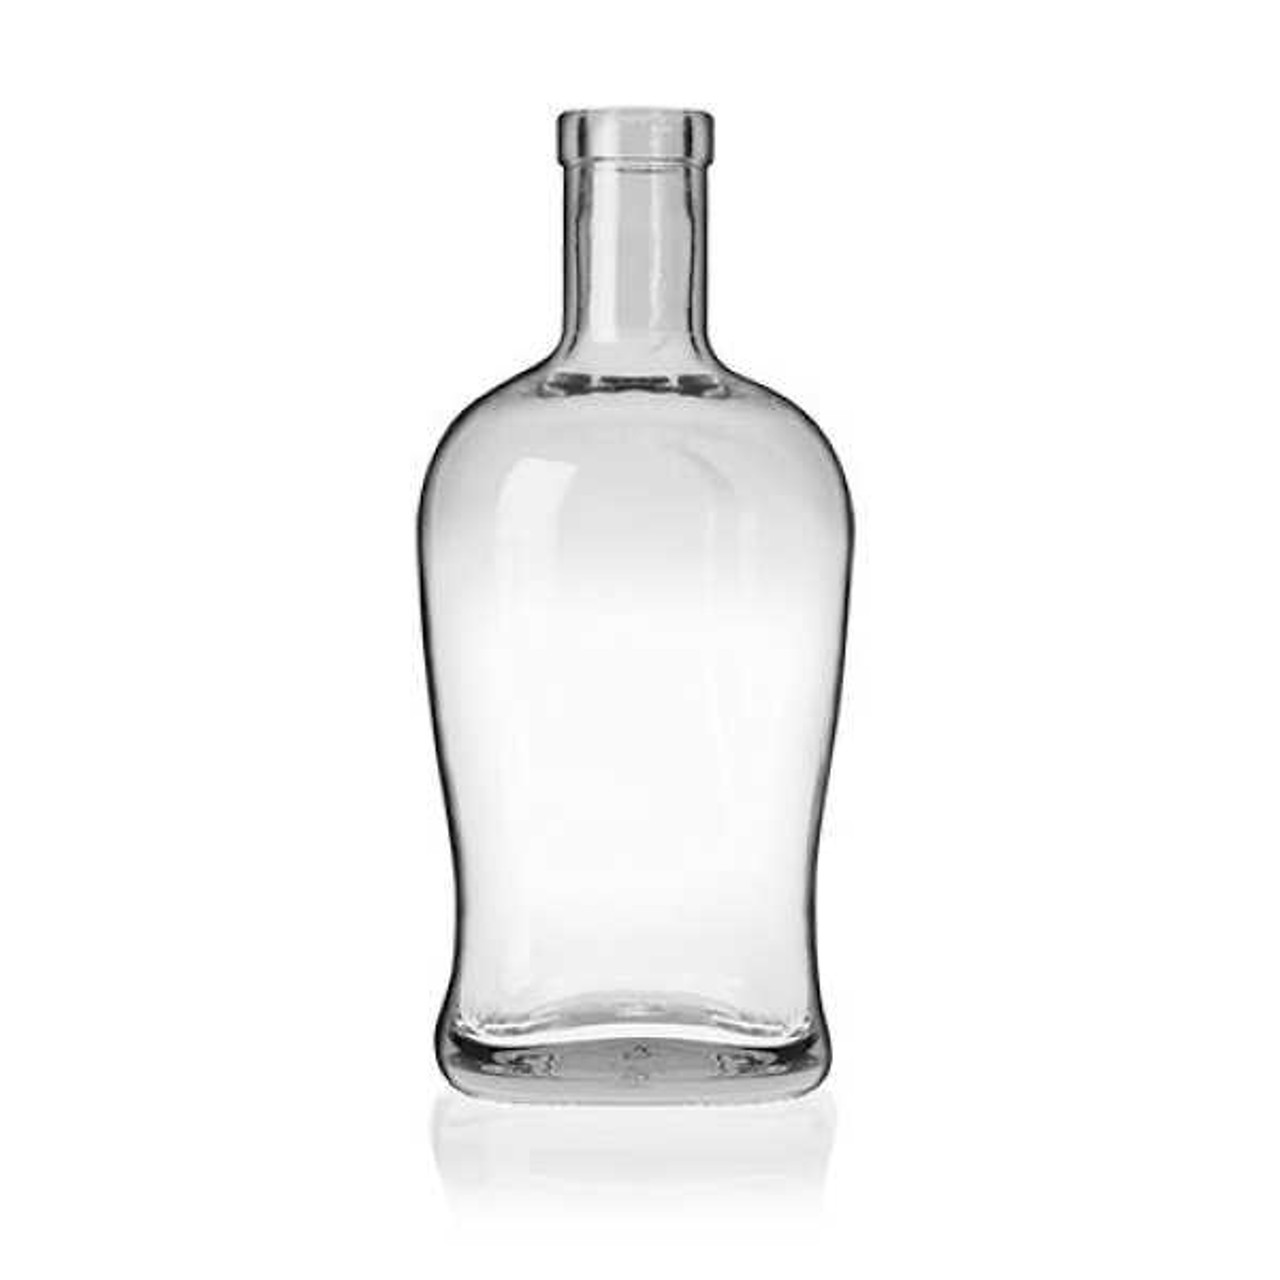 https://cdn11.bigcommerce.com/s-1ybtx/images/stencil/1280x1280/products/1688/7855/750-ml-25-oz-Clear-Glass-Curvy-Milan-Liquor-Bottle-with-Bar-Top-and-Cork-Bottle-Stopper_7074__75029.1699989578.jpg?c=2